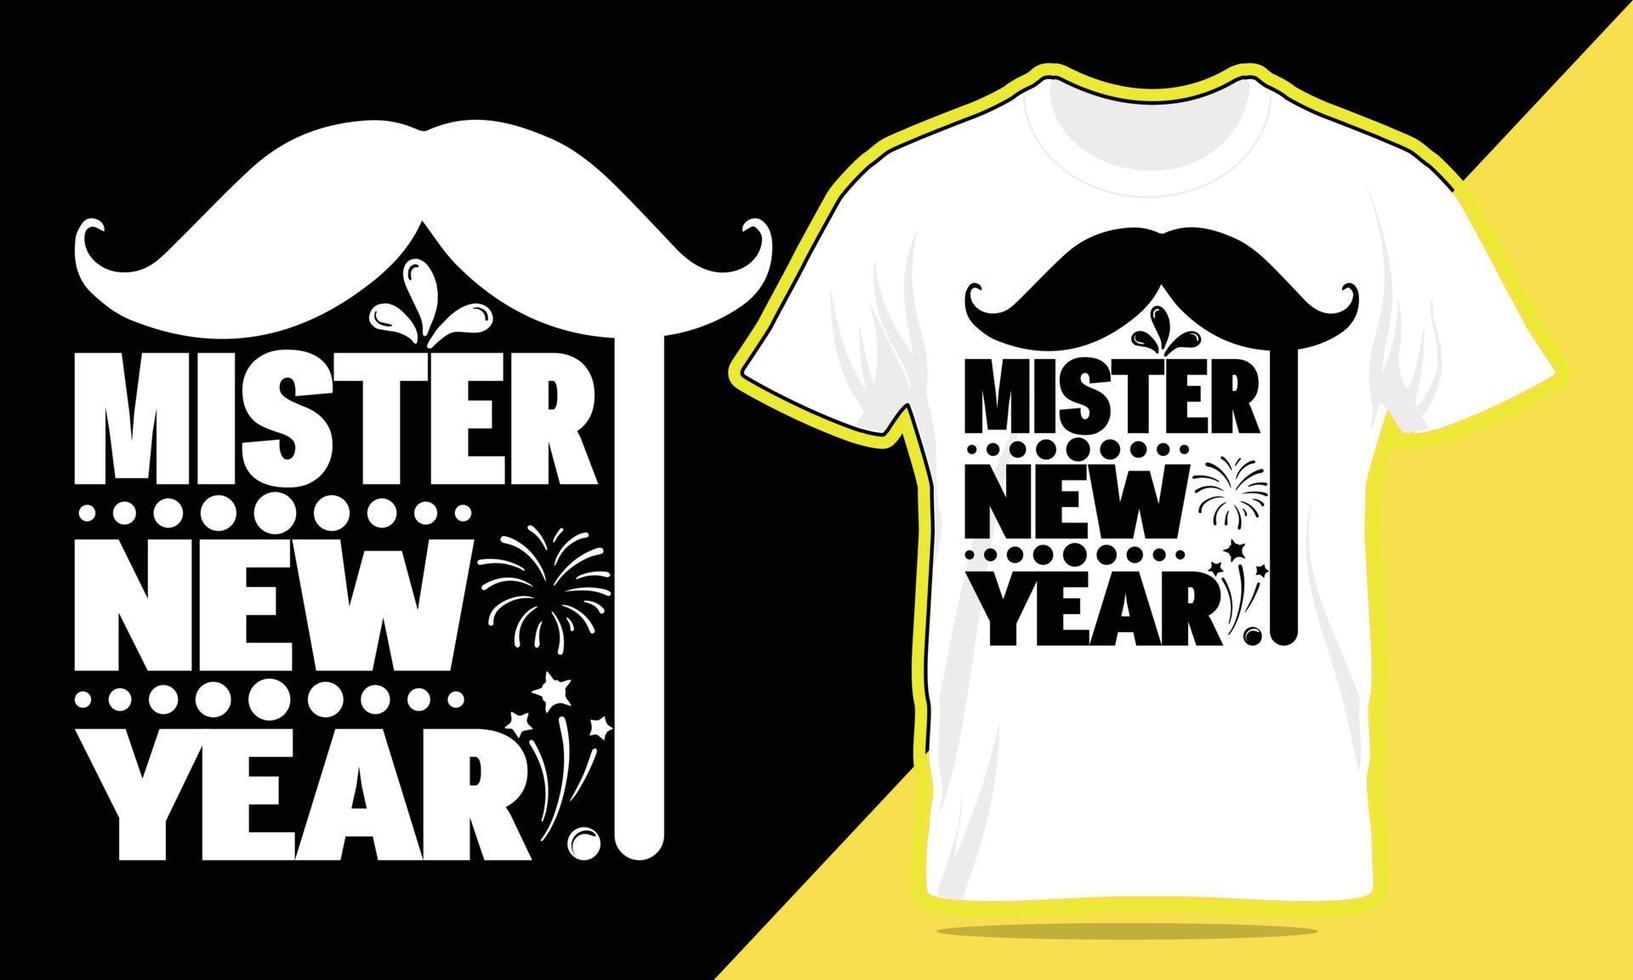 mister new year, new year t shirt design vector